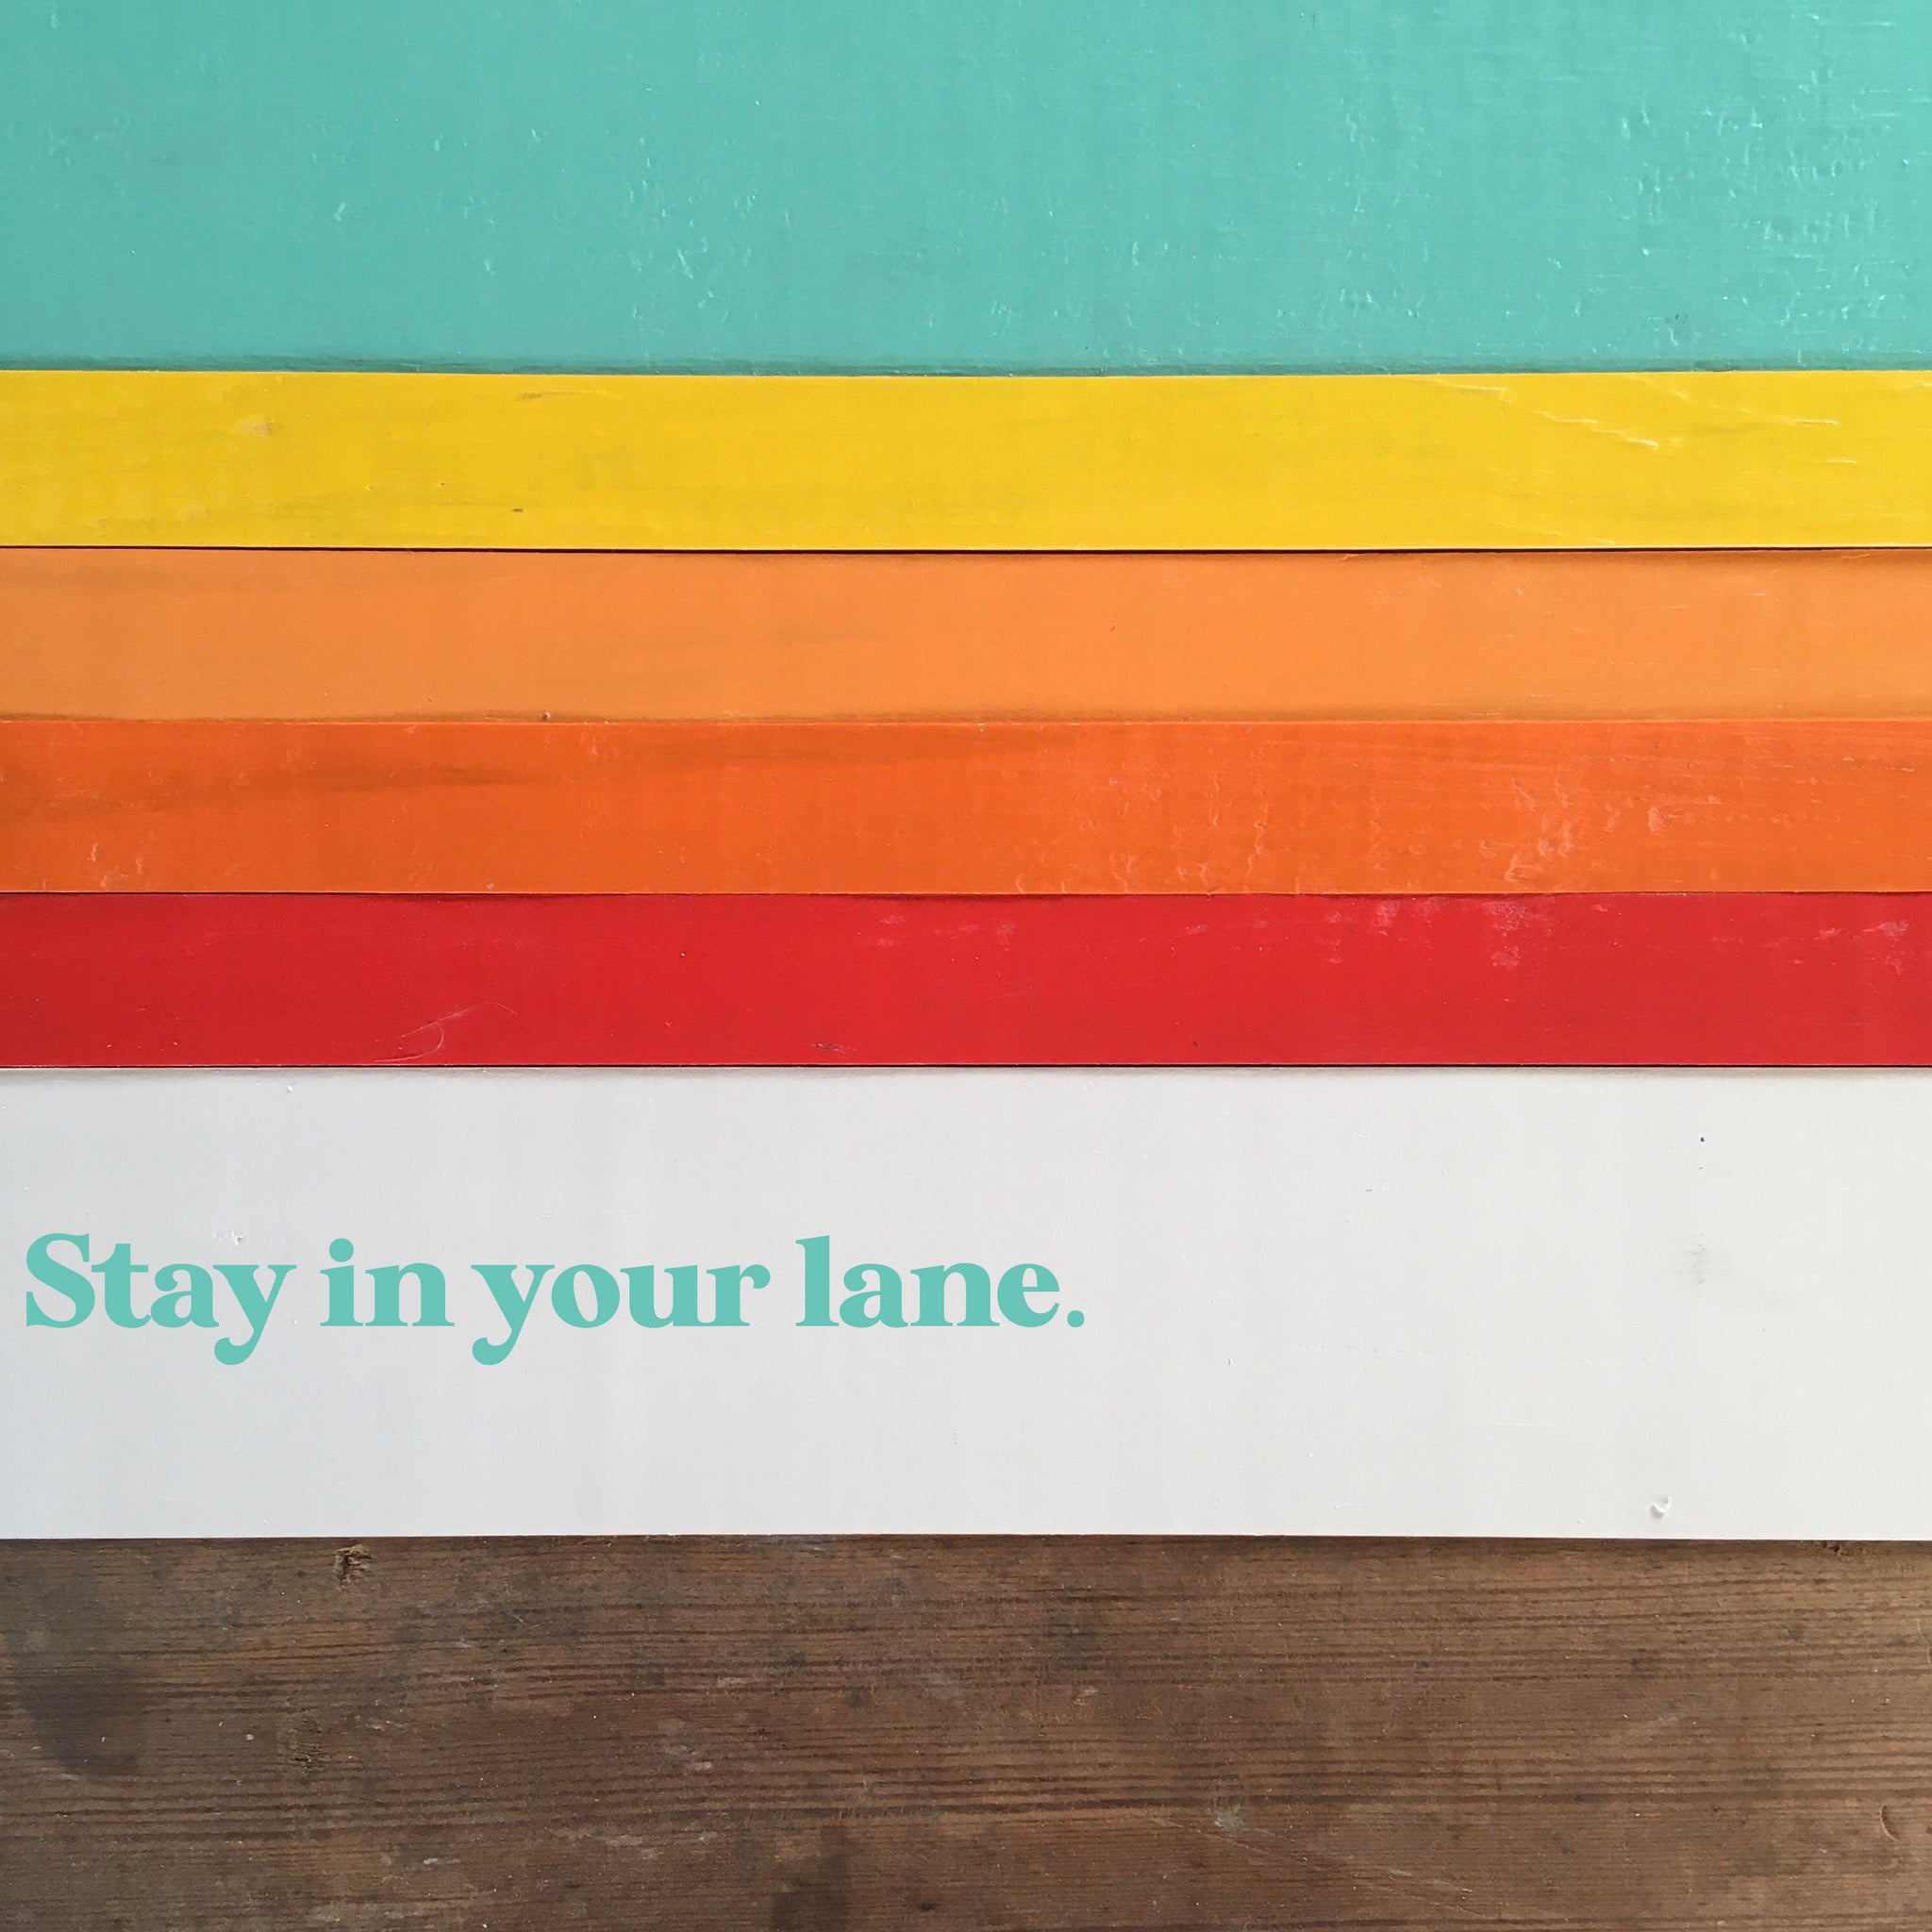 Motivation Monday: Stay in Your Lane.